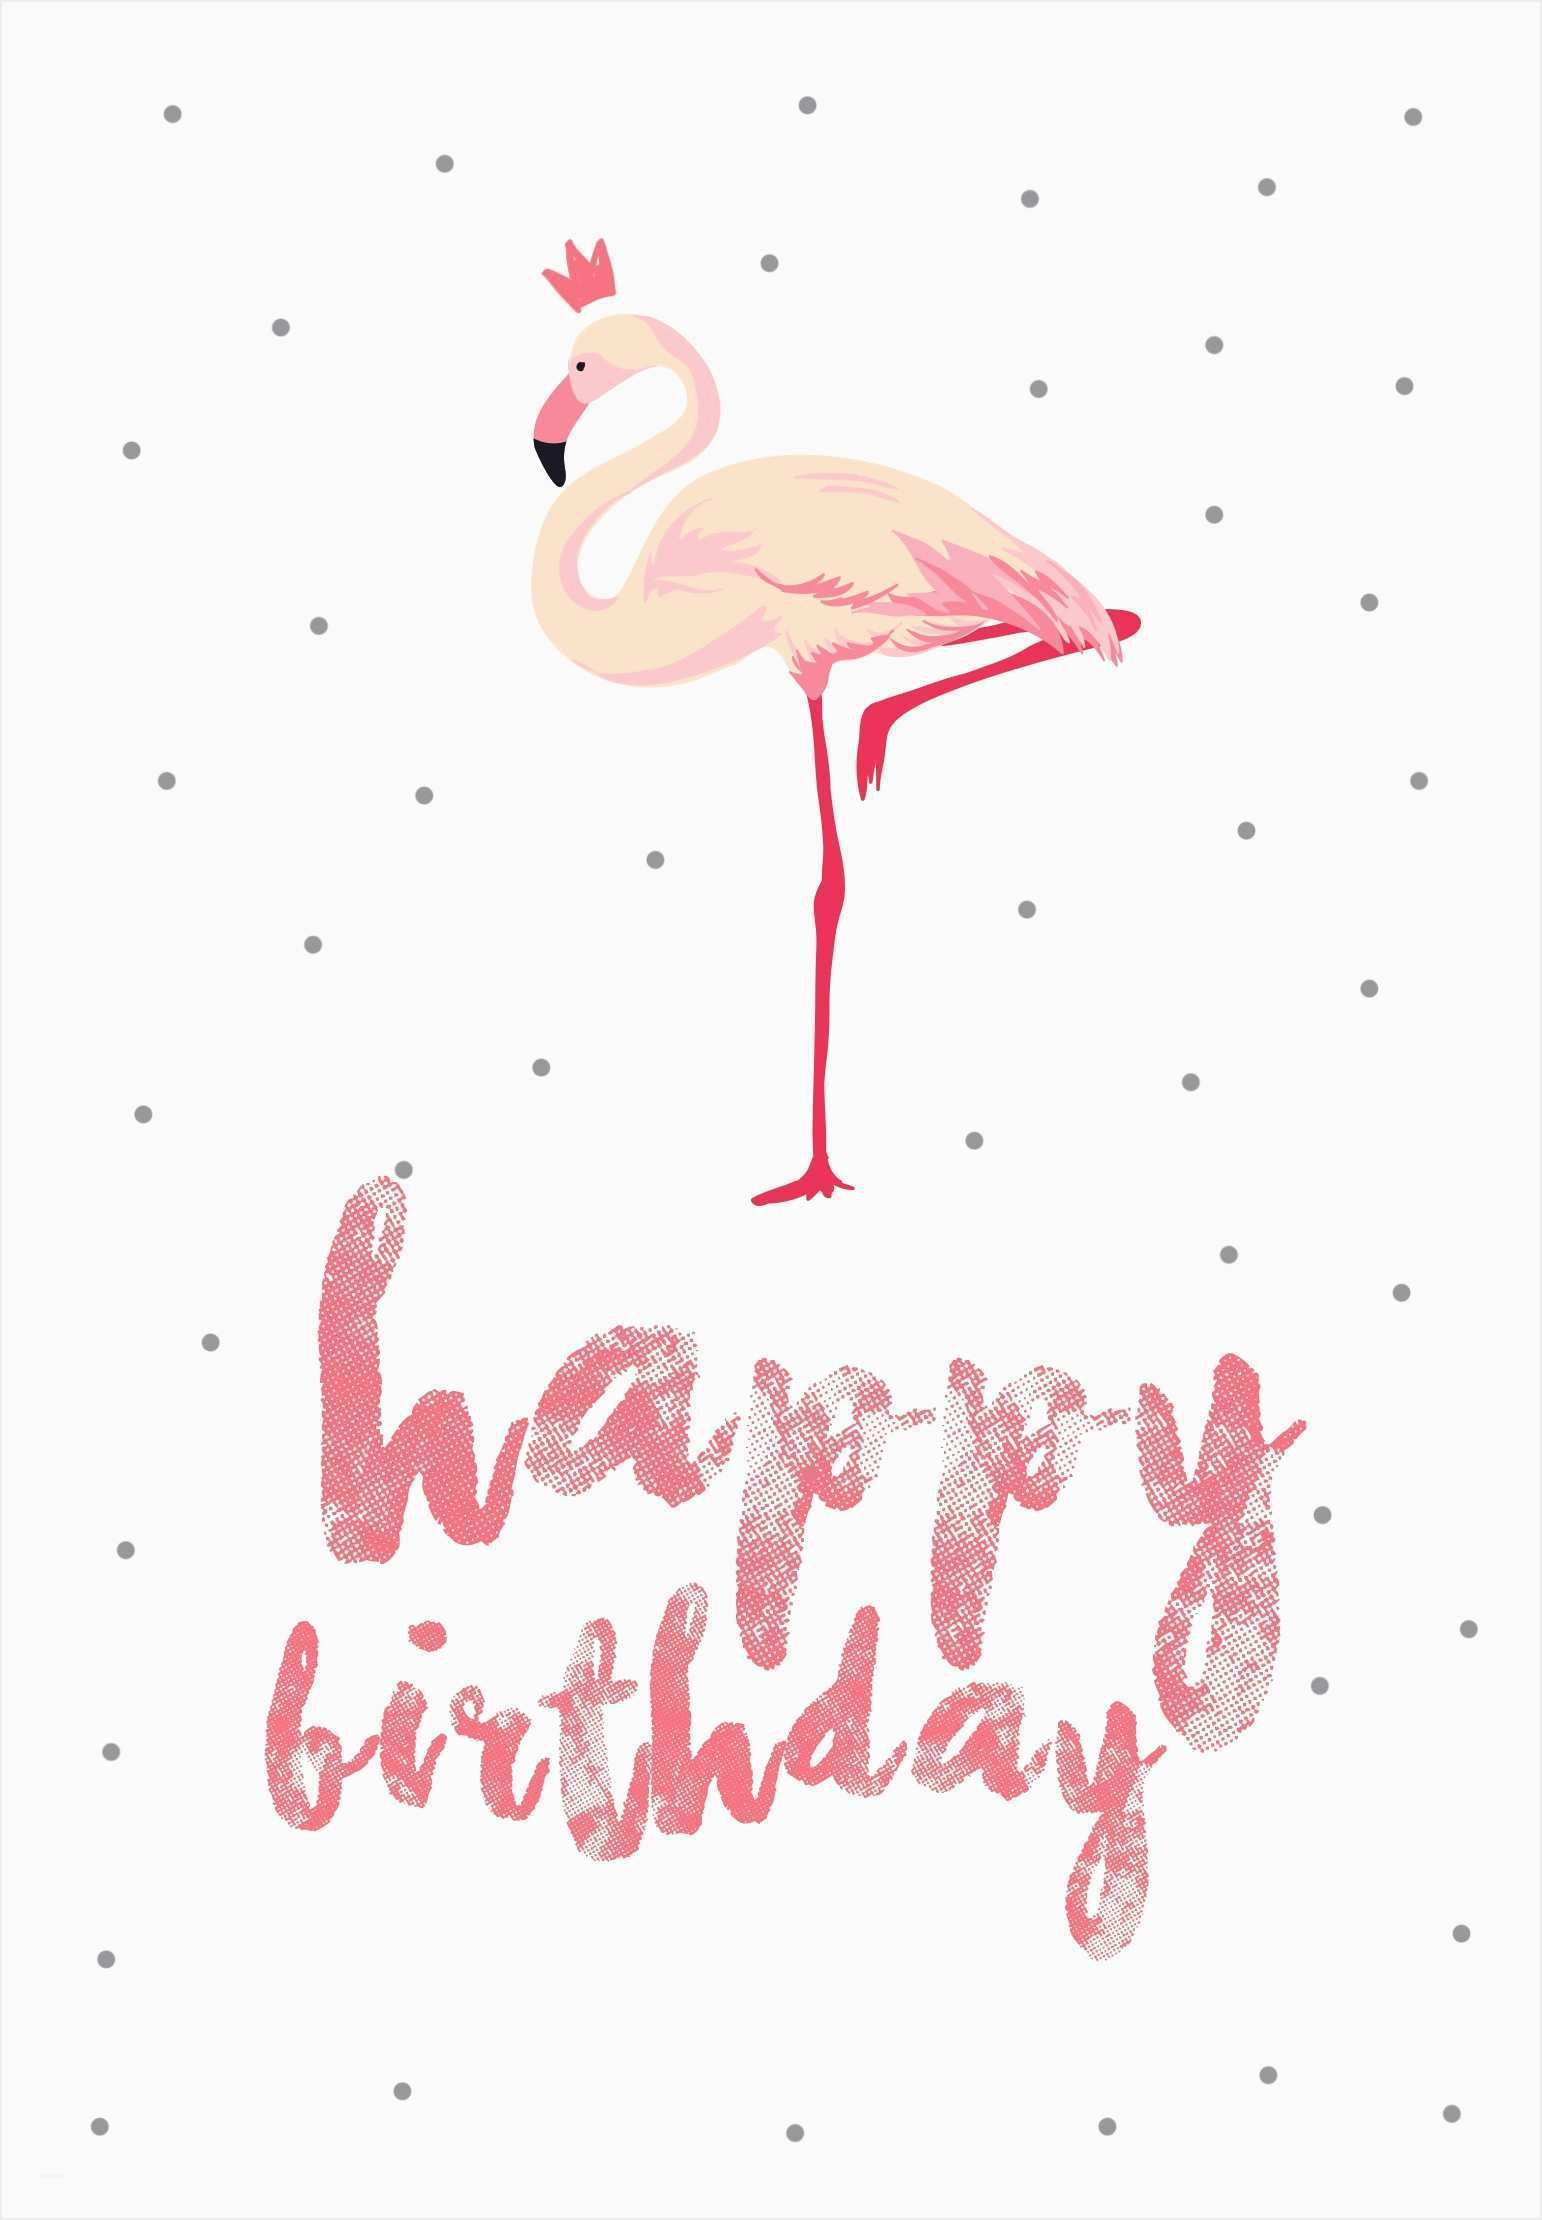 Free Printable Birthday Cards For Mom Best Of Free Printable - Free Printable Hallmark Cards